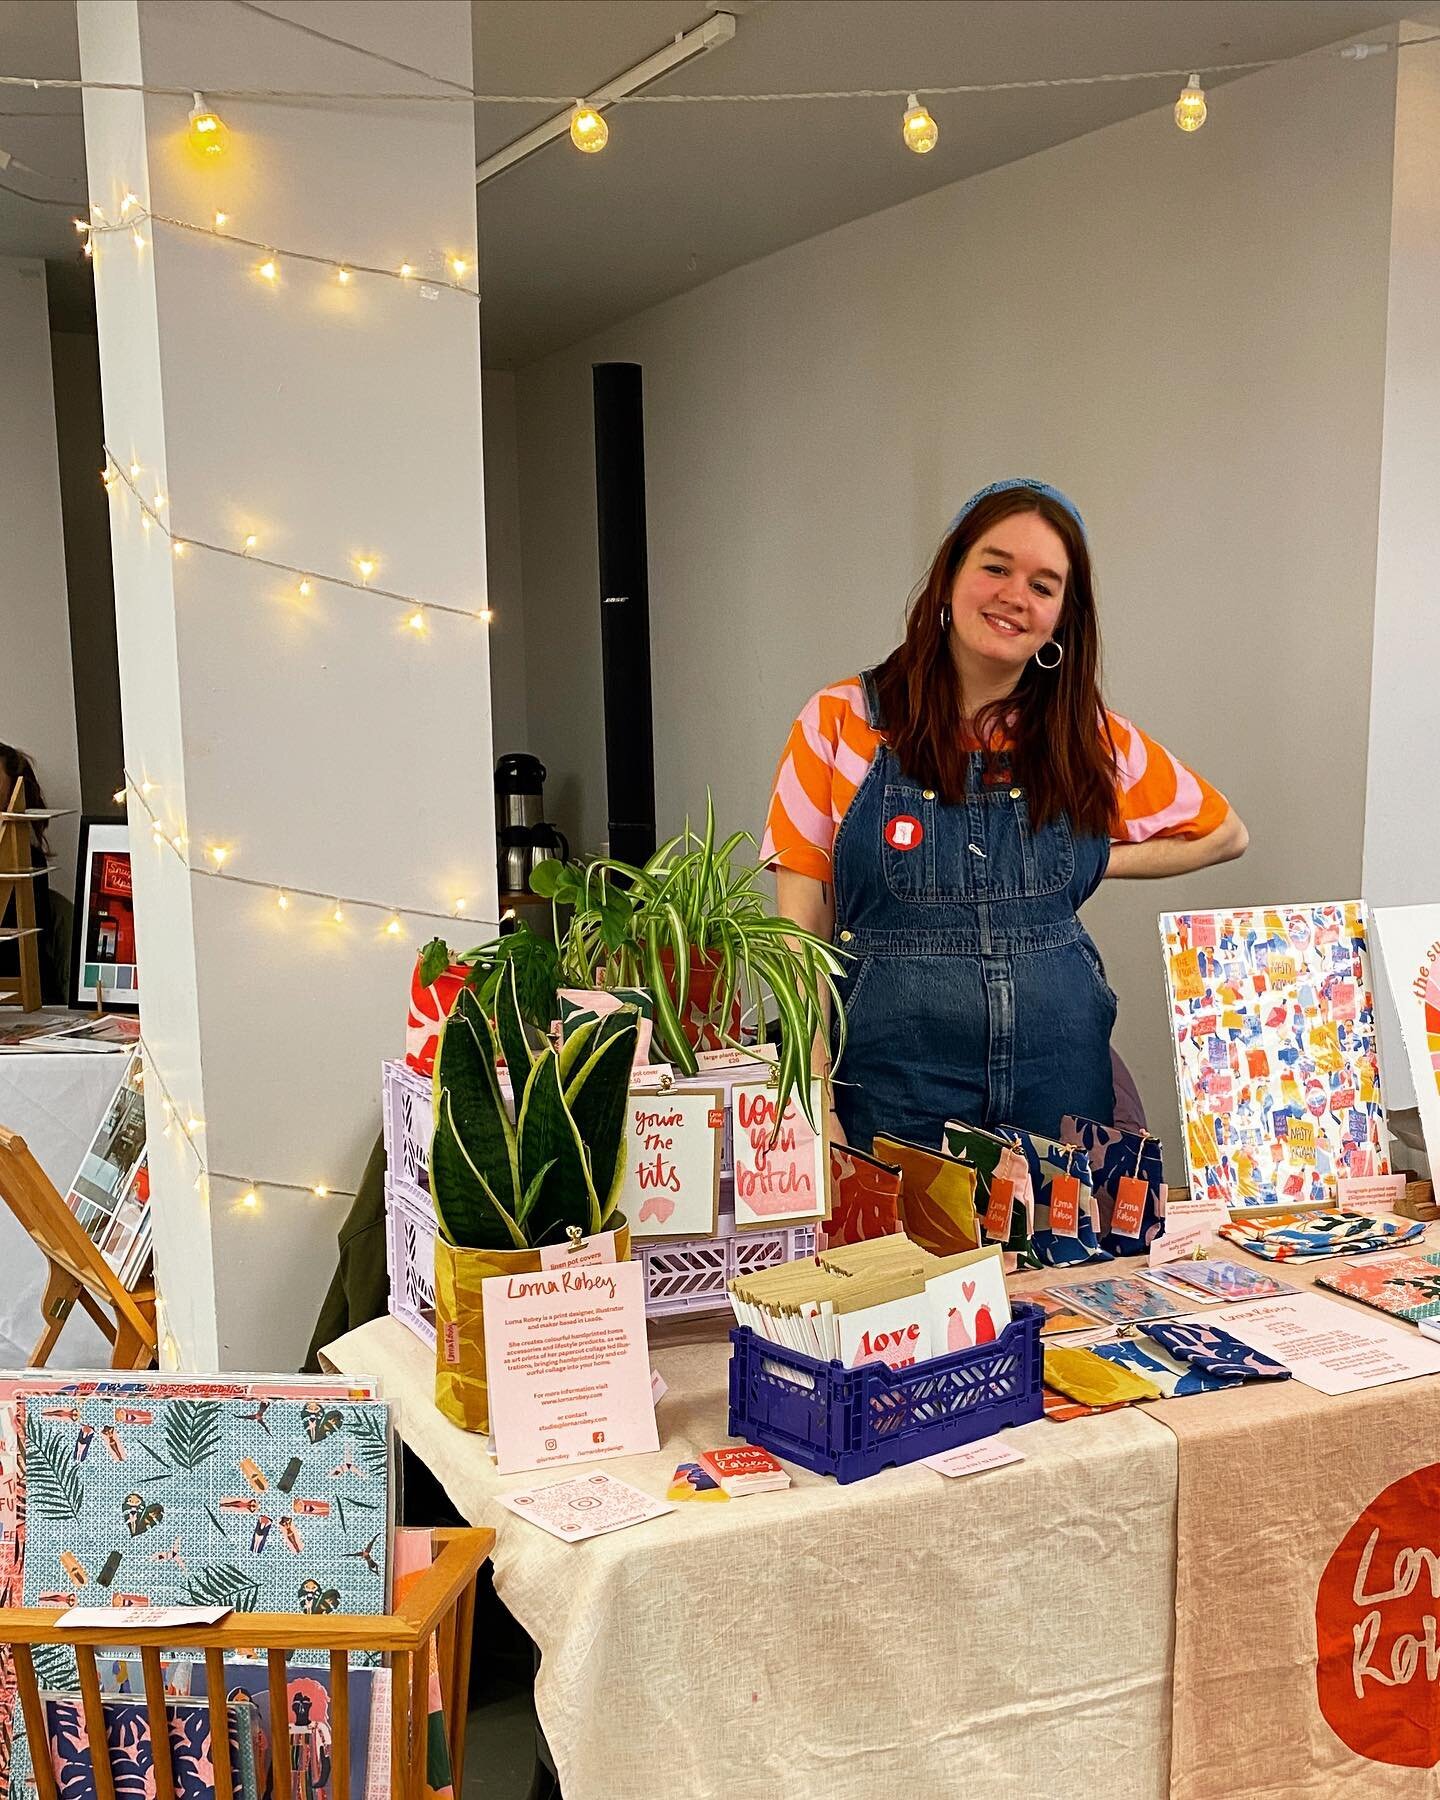 happy sunday!!! i&rsquo;m here at @the_tetley with wonderful helper @annajanehudson for day 2 of their valentines makers market til 4 today! there&rsquo;s lovely makers stalls and food stalls, and lovely valentines vibes for your sunday! hope to see 